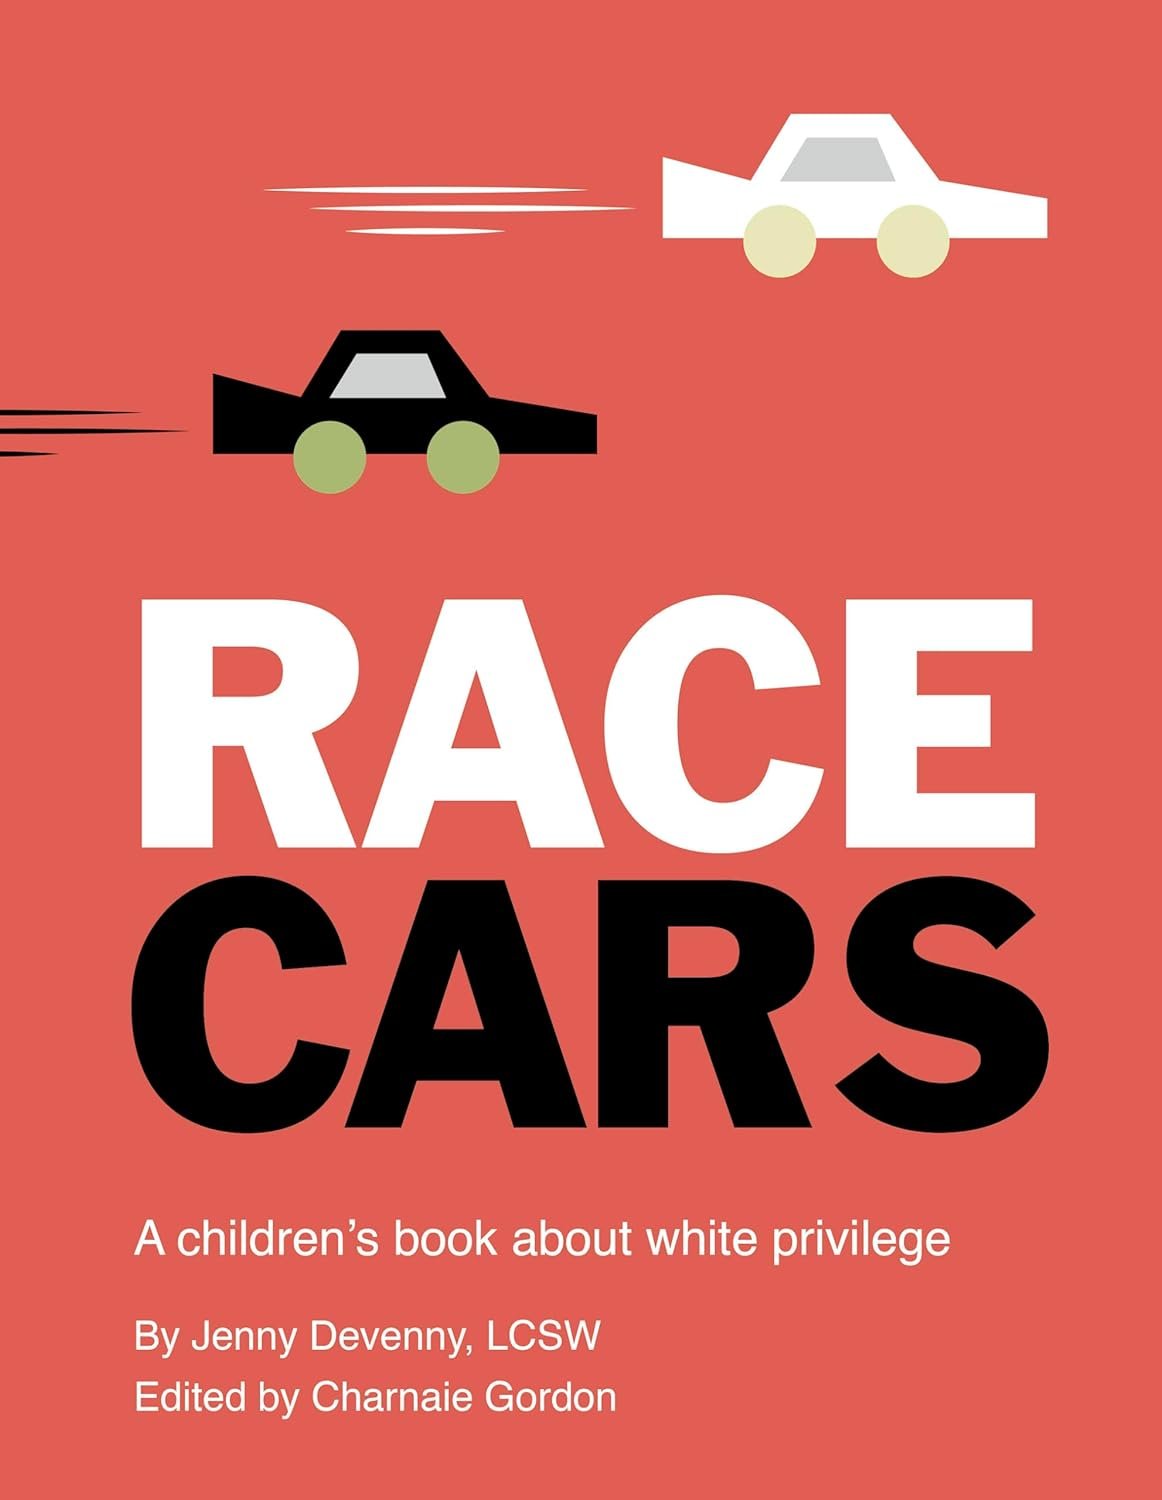 Book cover titled "Race Cars: A children's book about white privilege" featuring simplistic illustrations of three cars (white, black, and green) on a red background. The subtitle reads "A Children's Book by Jenny Devenny (Author), Charnaie Gordon (Editor)".